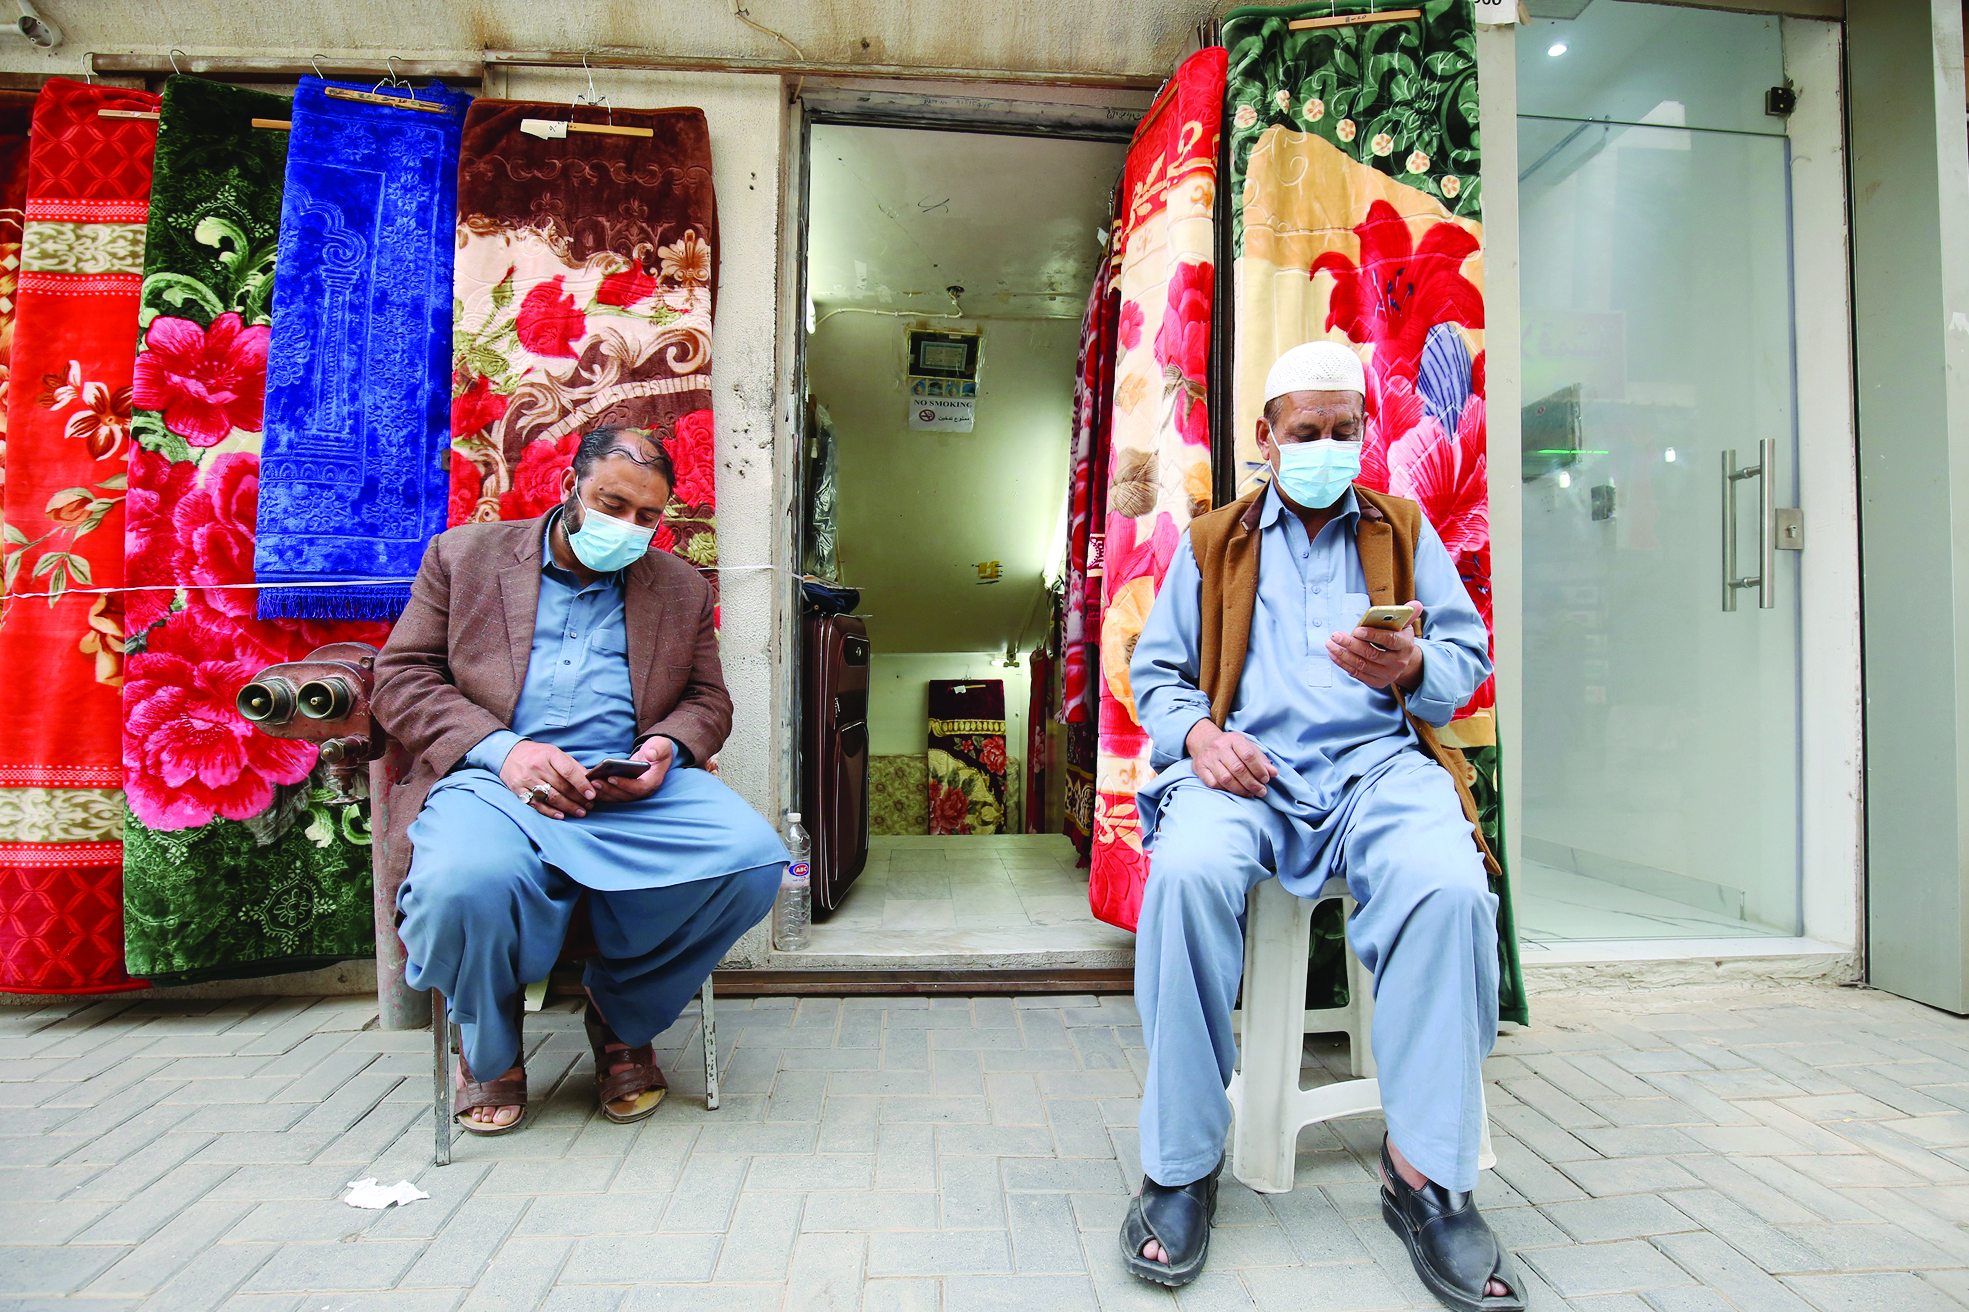 Vendors, wearing protective masks, sit outside their shop in Kuwait City on February 26, 2020. - The new coronavirus hit four more Middle Eastern states, with Bahrain, Iraq, Kuwait and Oman reporting new cases and the UAE calling on its citizens not to travel to Iran and Thailand. Kuwait, for its part, called off celebrations for the Gulf state's national day, as it confirmed its first three cases of the virus, all connected to Iran. (Photo by YASSER AL-ZAYYAT / AFP)